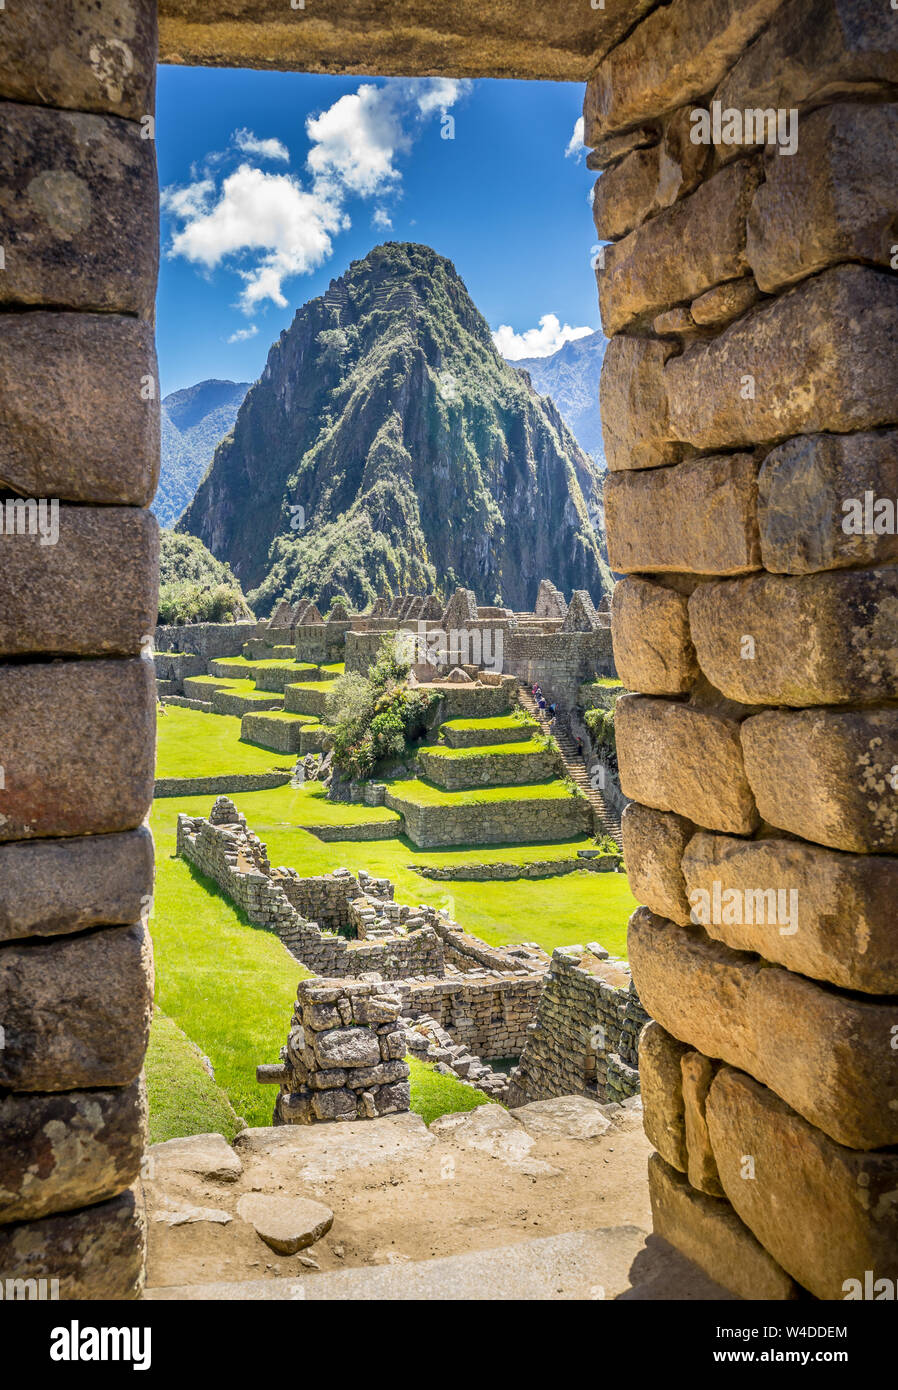 The Inca ruins of Machu Picchu, UNESCO World Heritage Site through the frame of stone wall Stock Photo